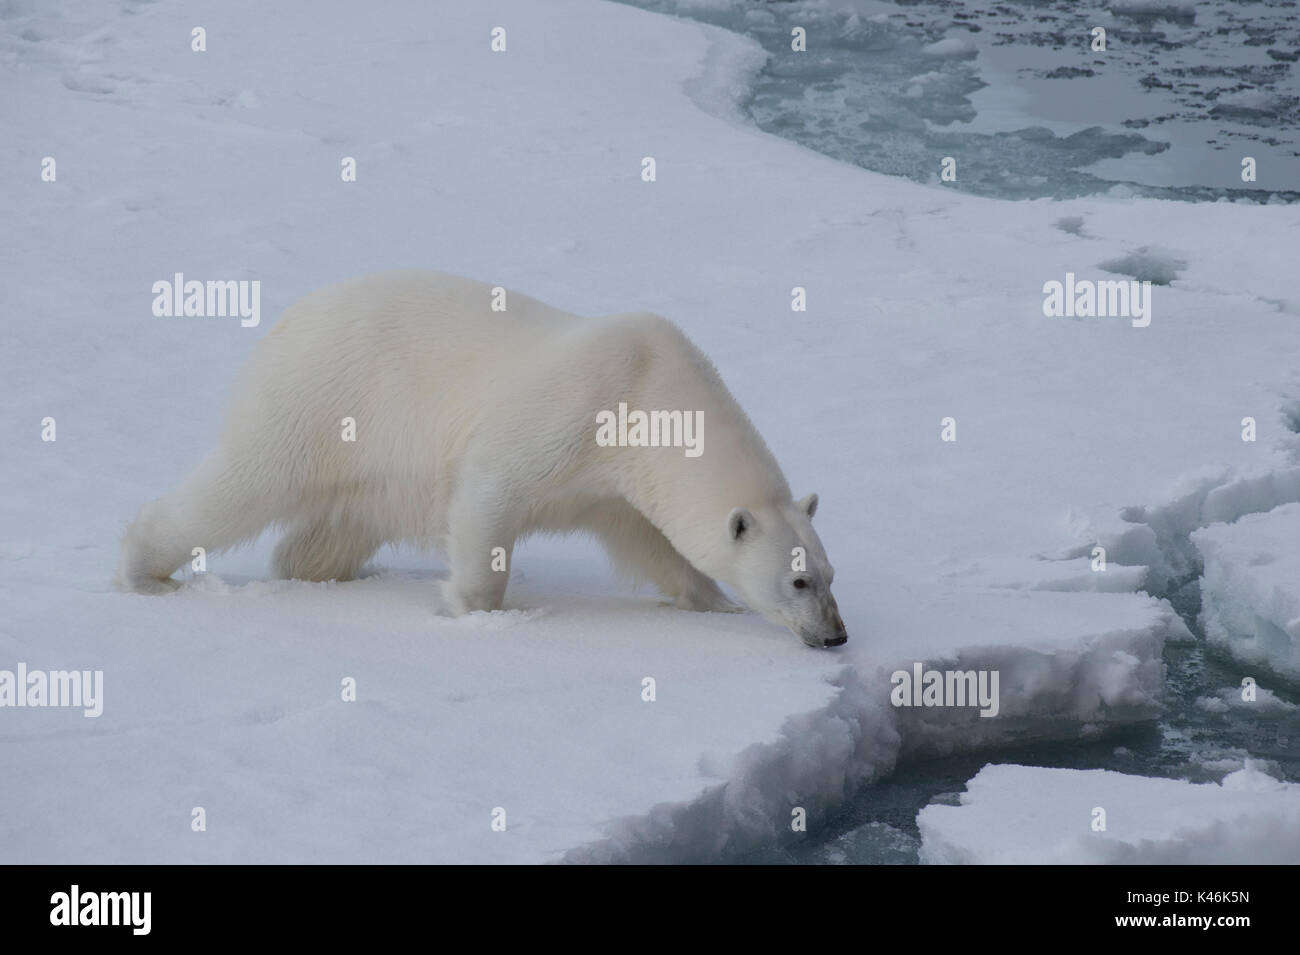 Big polar bear on drift ice edge with snow a water in Arctic North Pole Stock Photo